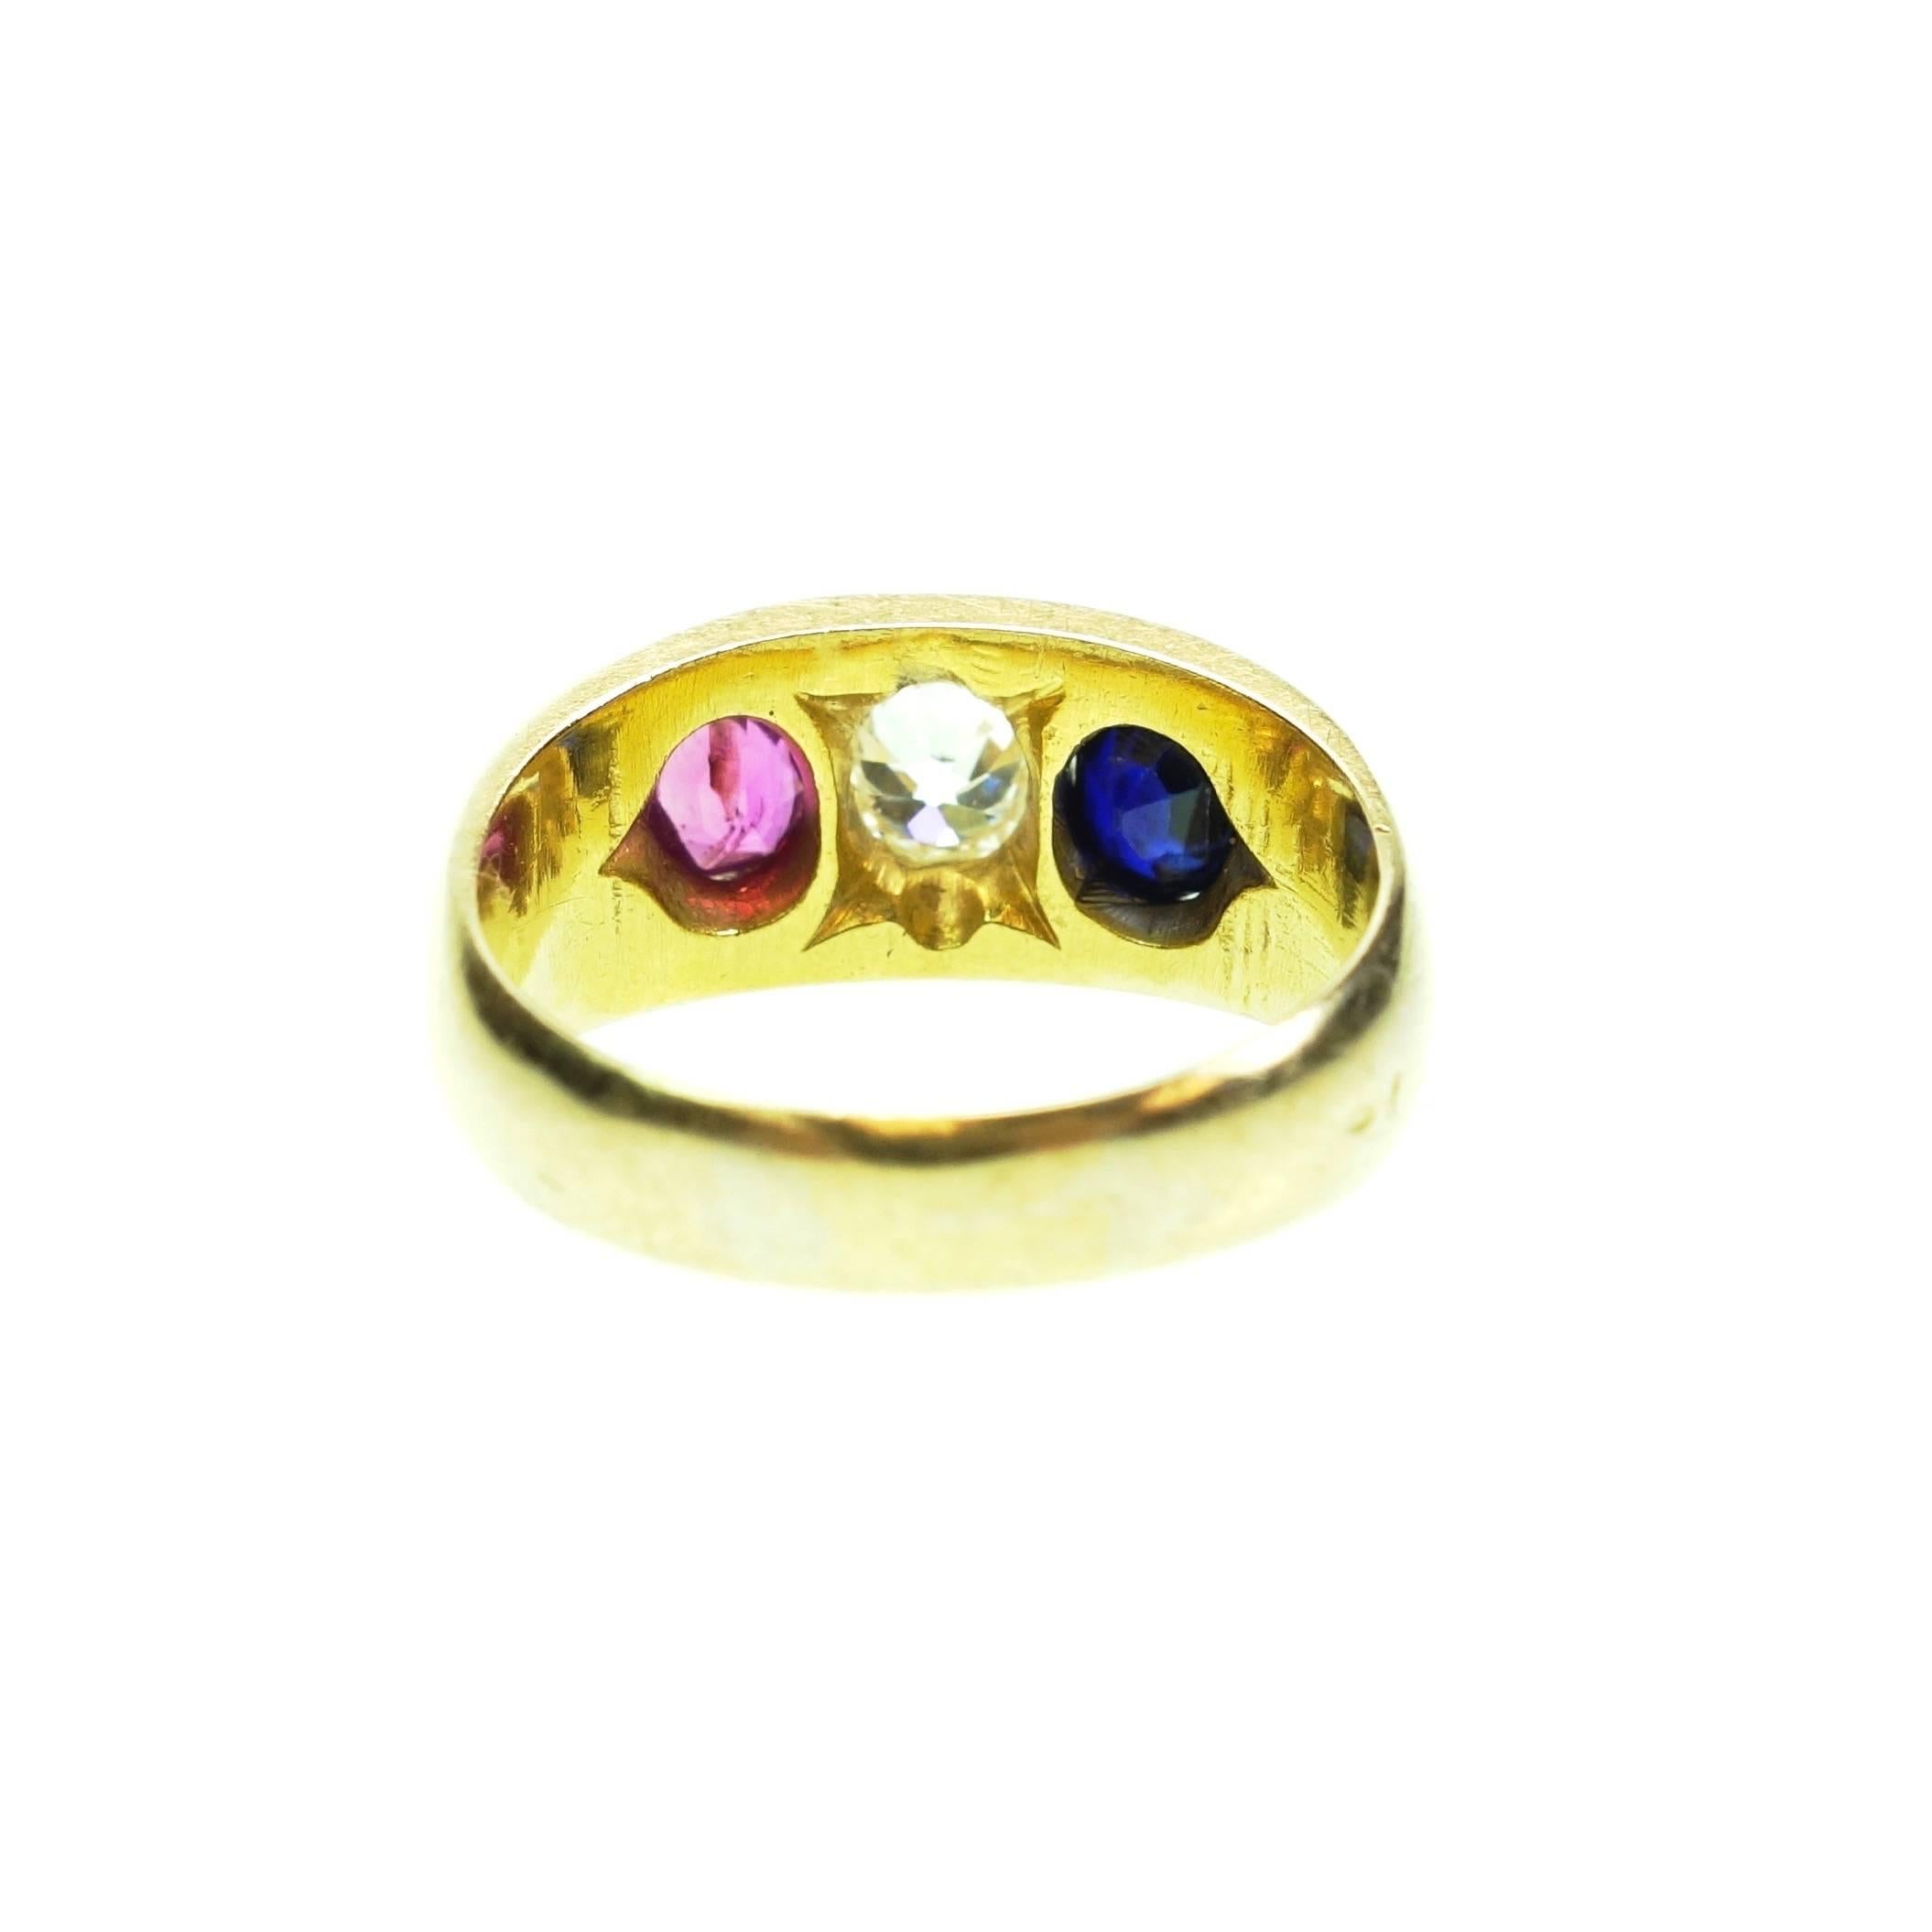 Crafted in 18K yellow gold and kept in it's original condition this beautiful 
three-stone ring. In the center there is an approximately 0.50ct old european cut diamond, Color: H, Clarity: VS-1
Next to the diamond is a lively natural ruby and a